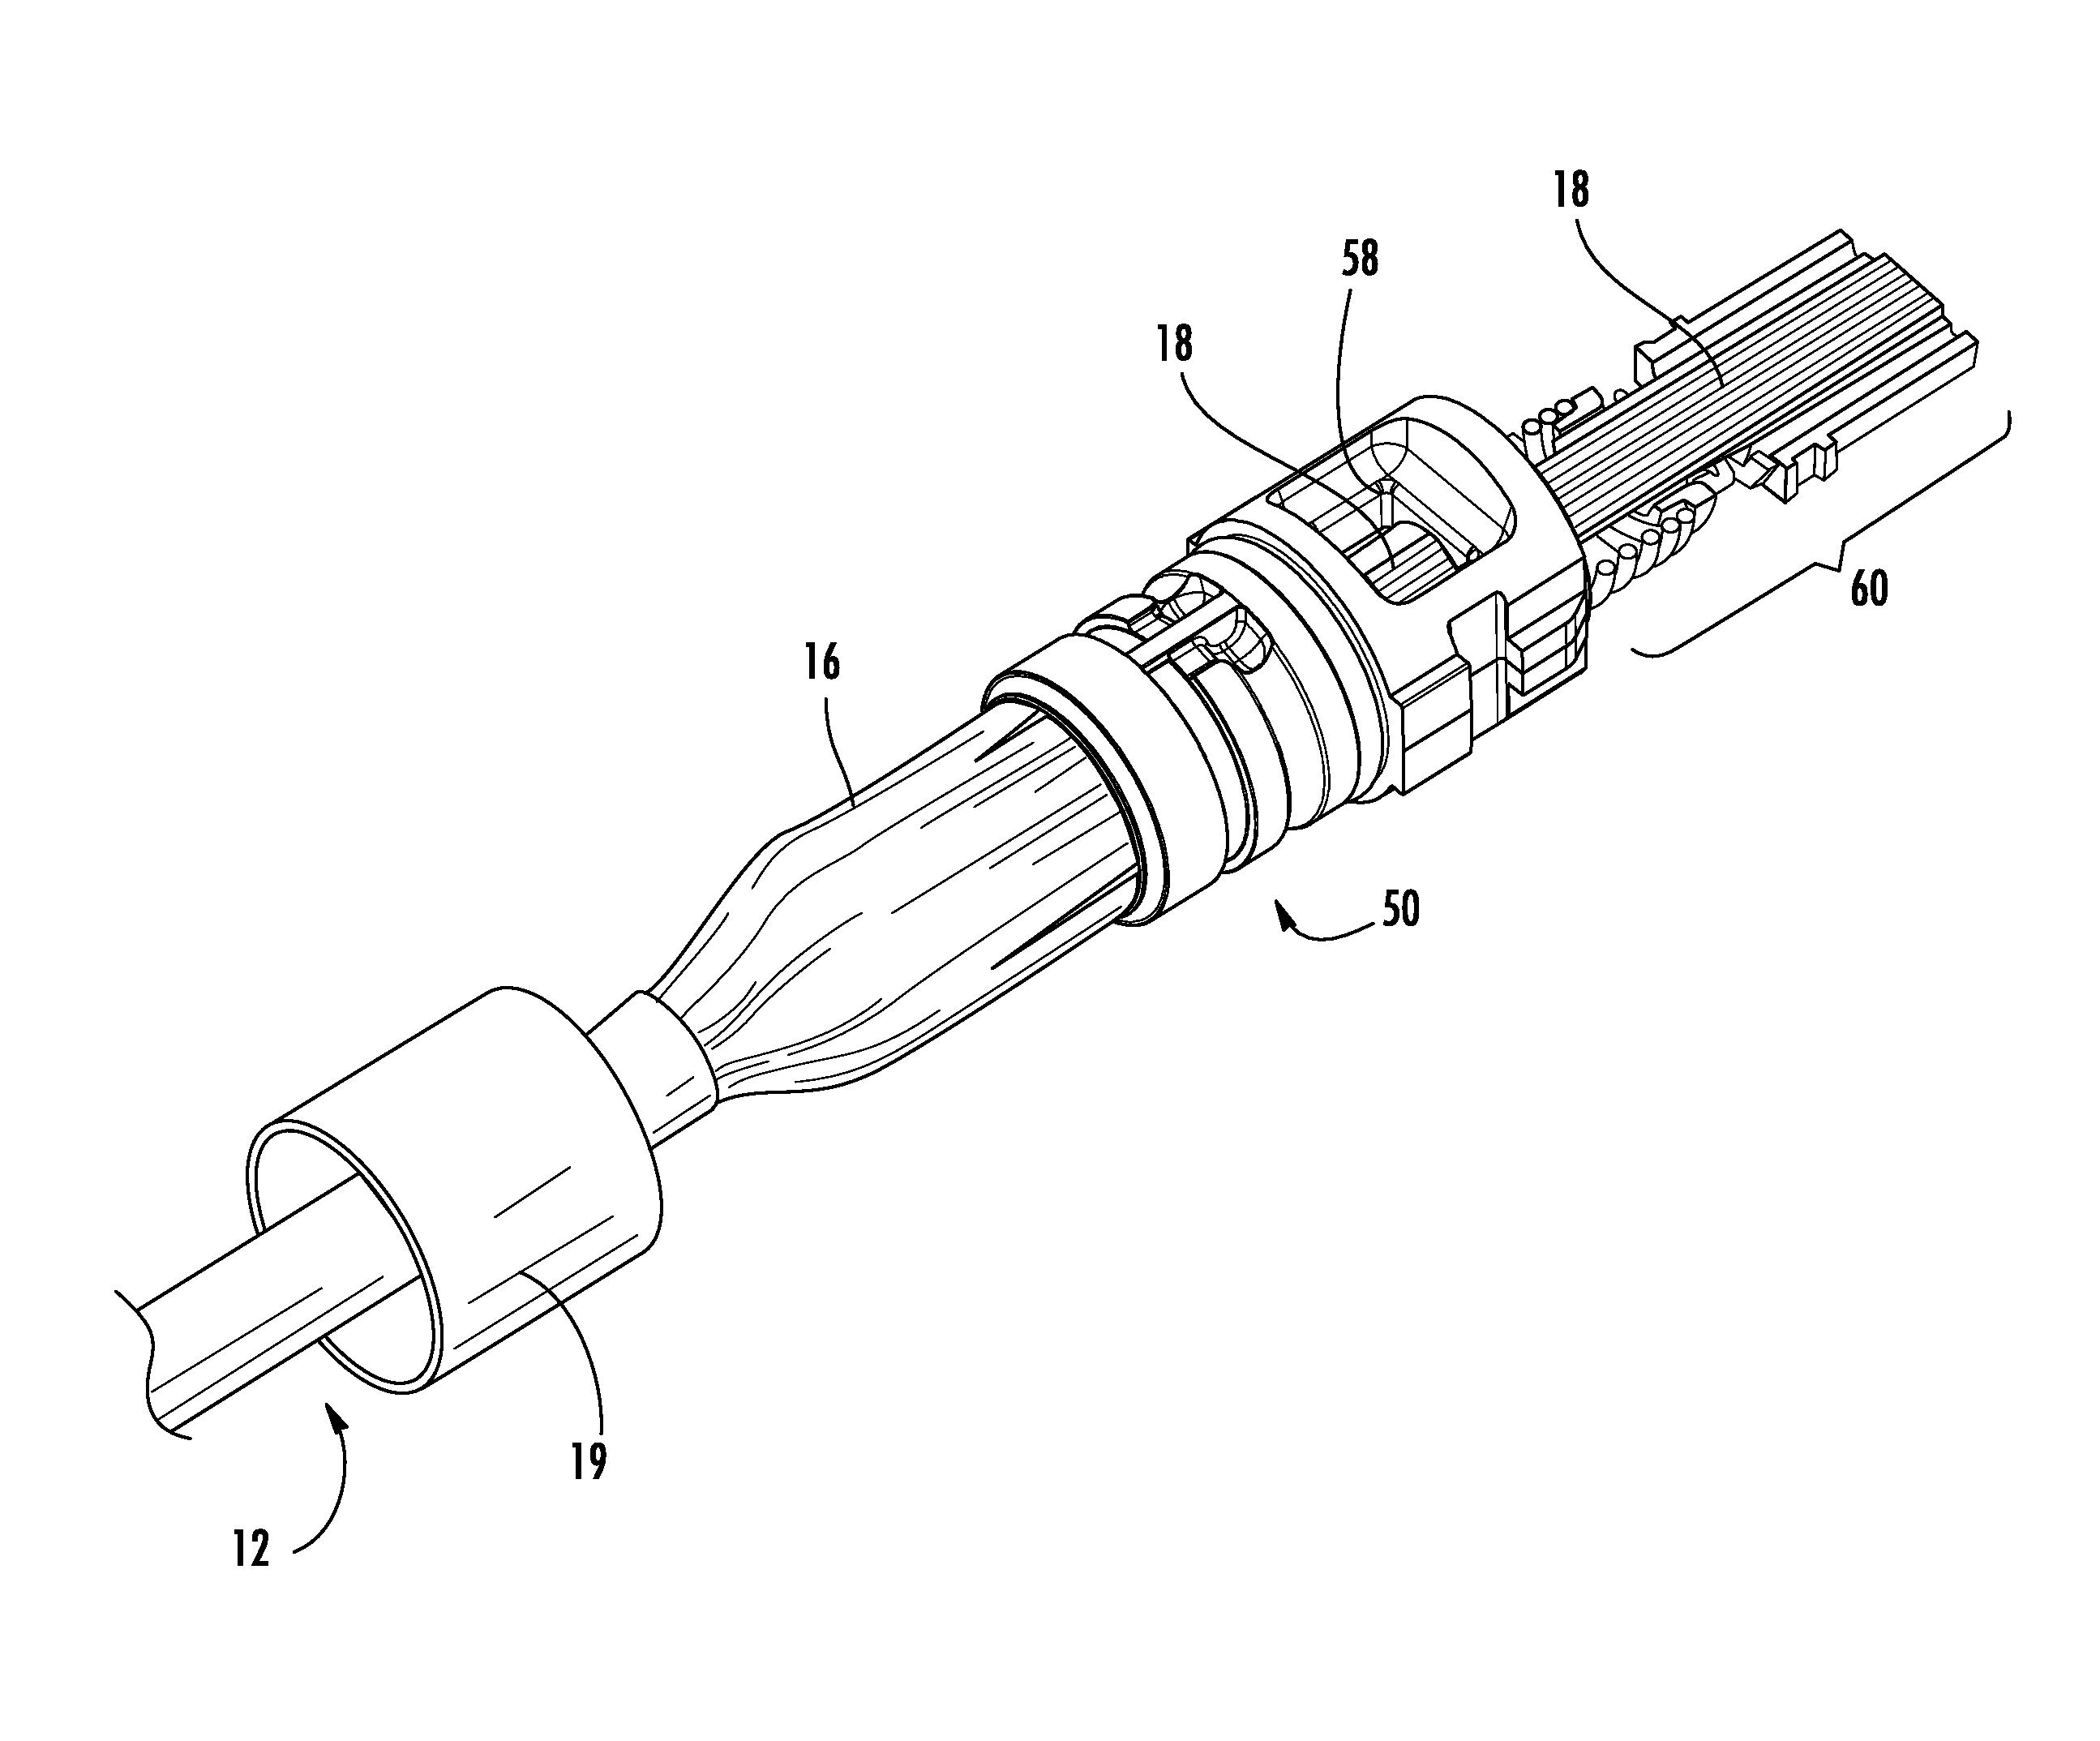 Fiber Optic Cable Assemblies with Fiber Access Apertures and Methods of Assembly